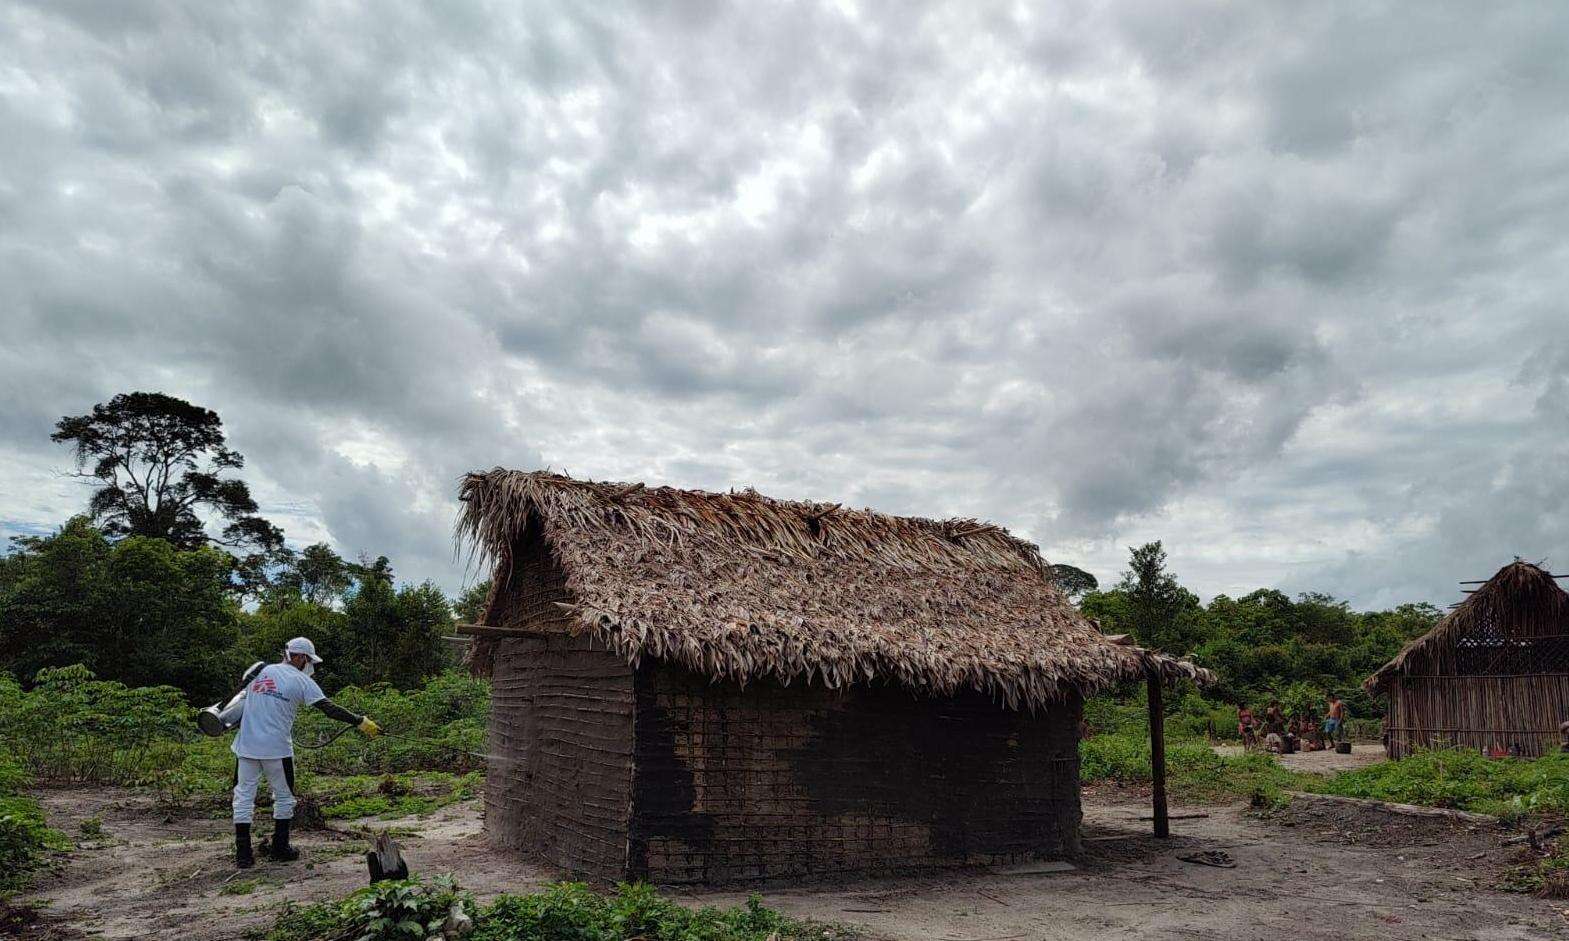 An MSF staff member is walking through a rural area to a hut with a thatched roof. 